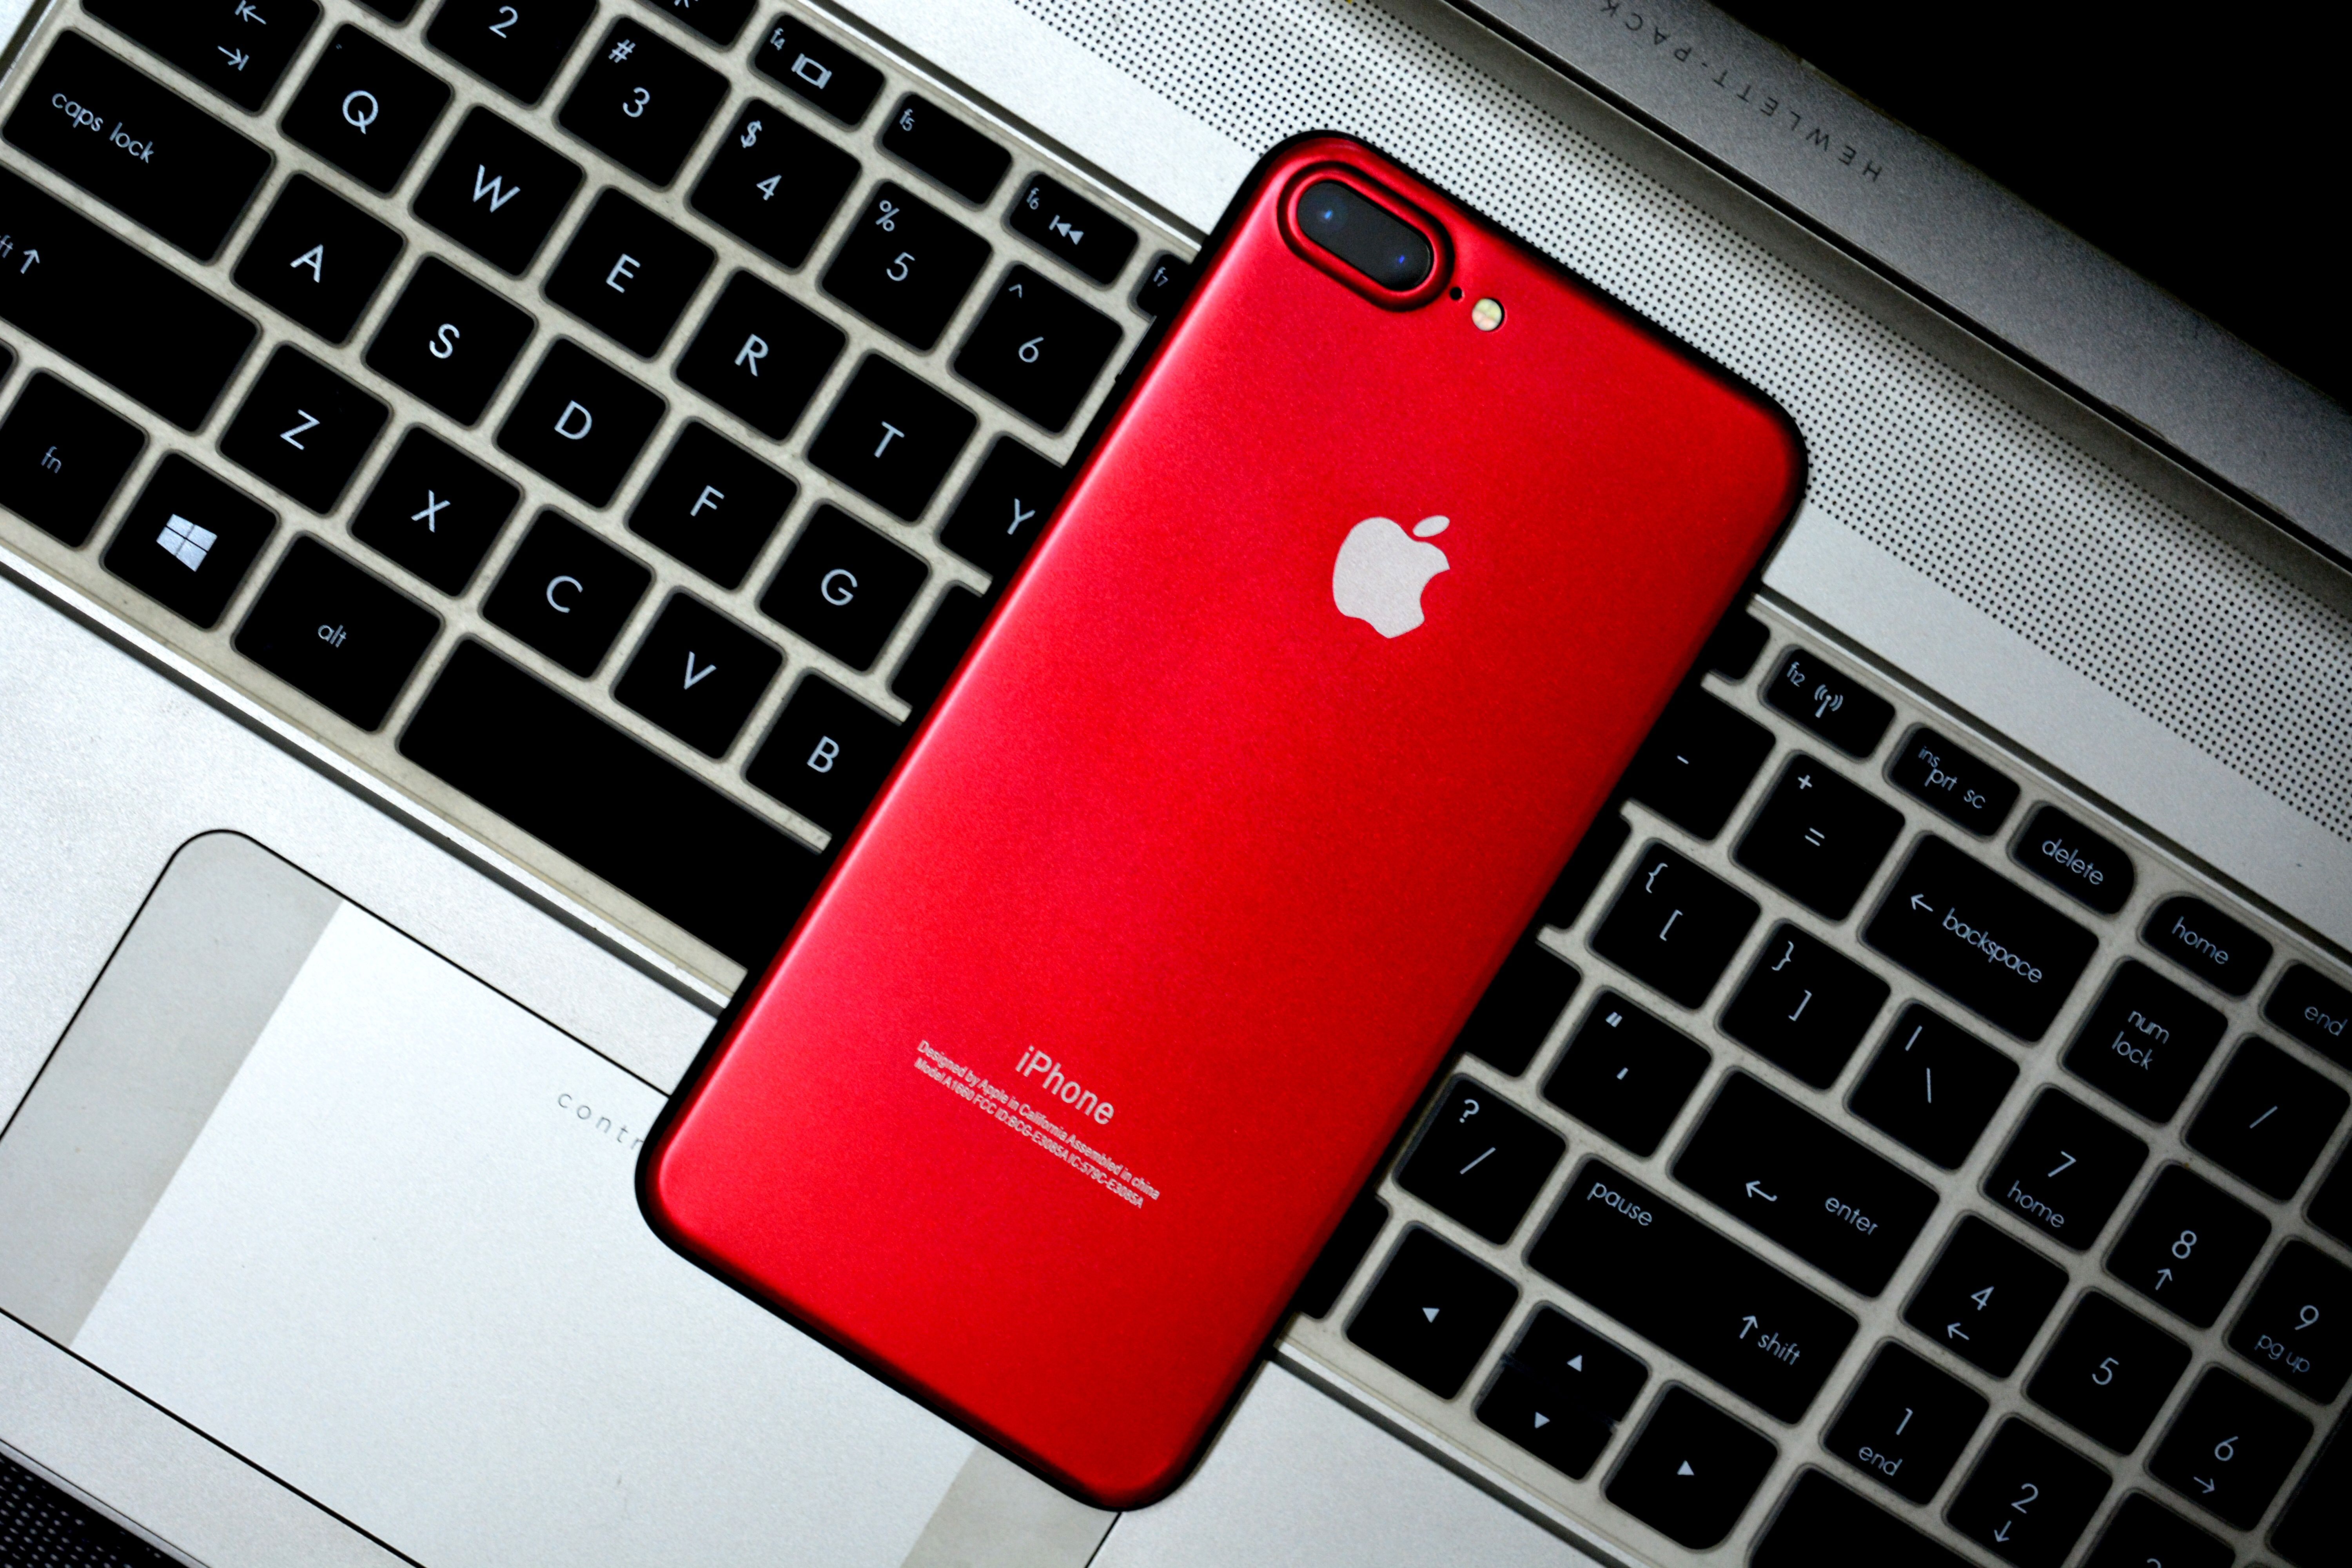 Red Aluminium Back Panel For iPhone Plus Which Makes It Look